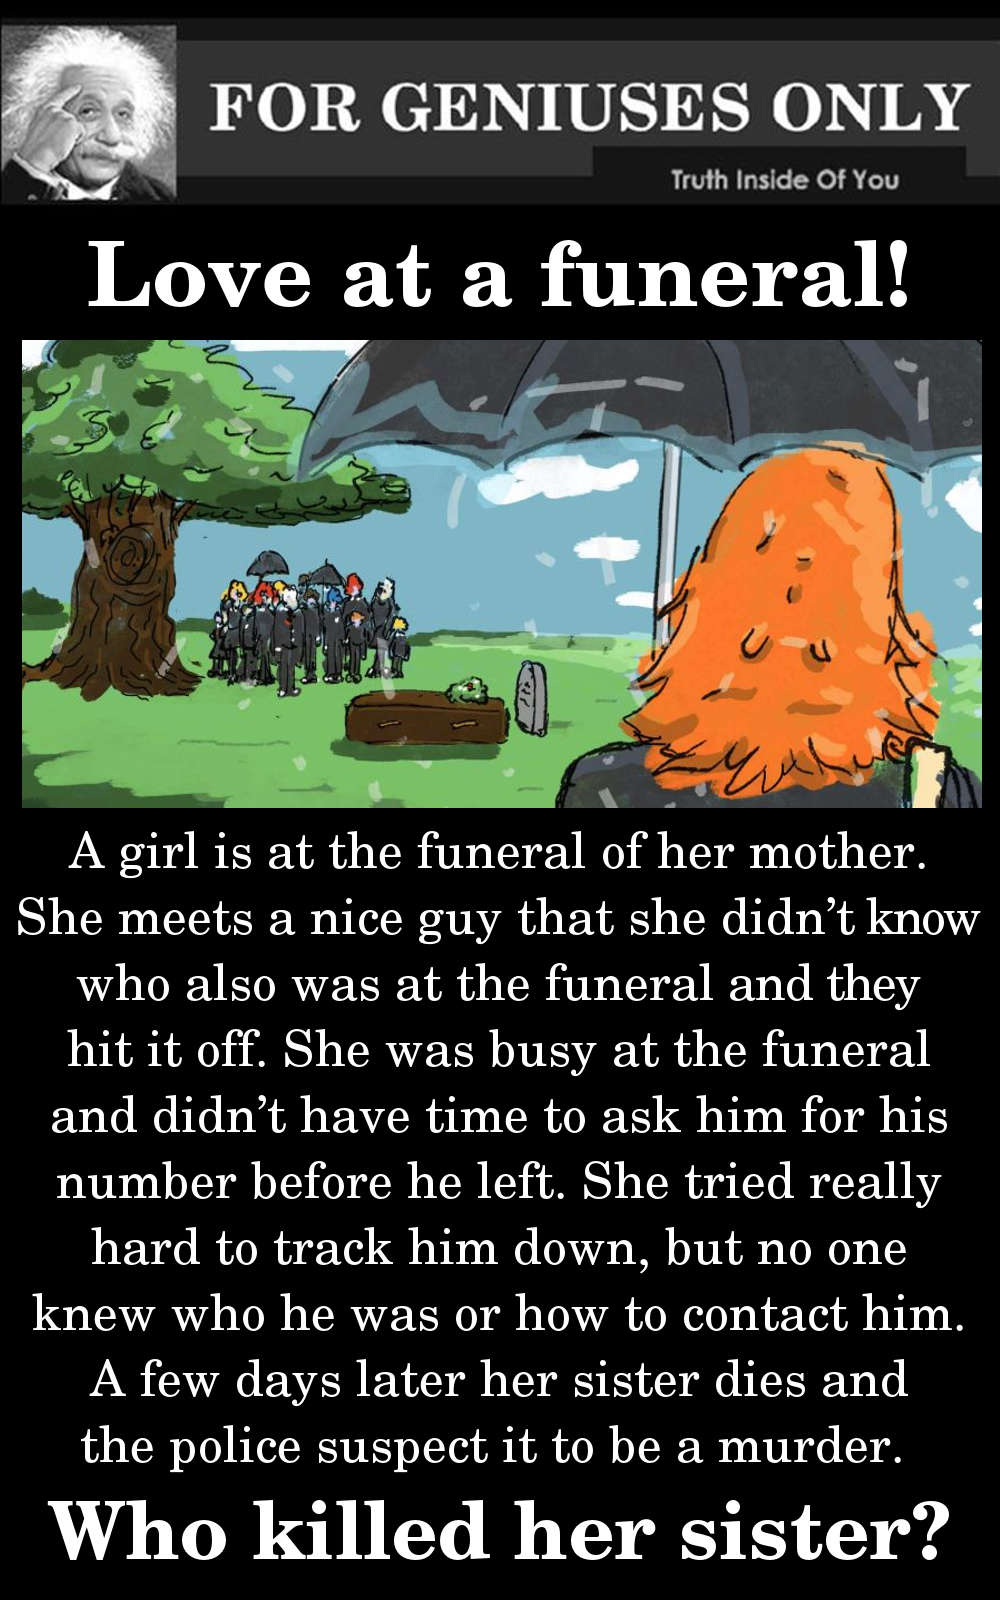 A girl is at the funeral of her mother.